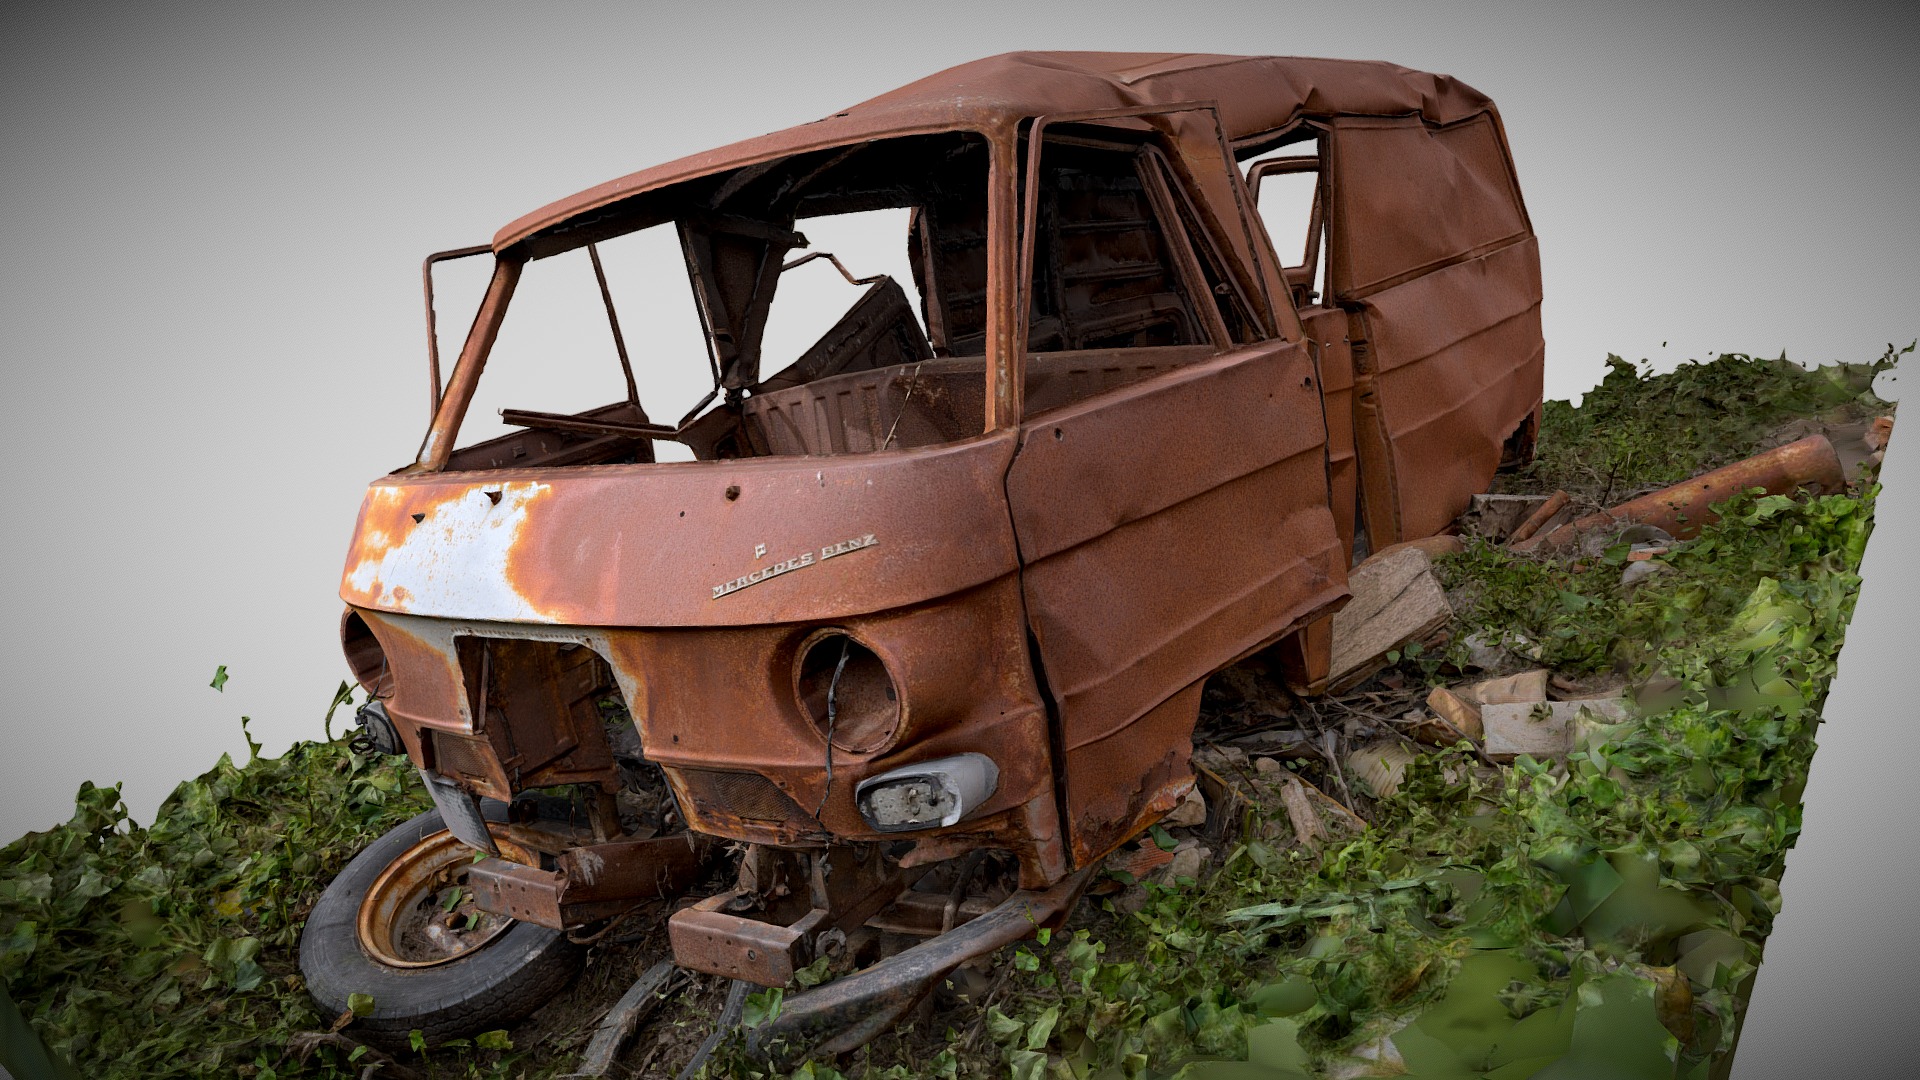 3D model Rusty old Mercedes Benz van - This is a 3D model of the Rusty old Mercedes Benz van. The 3D model is about a rusted out car in a field of plants.